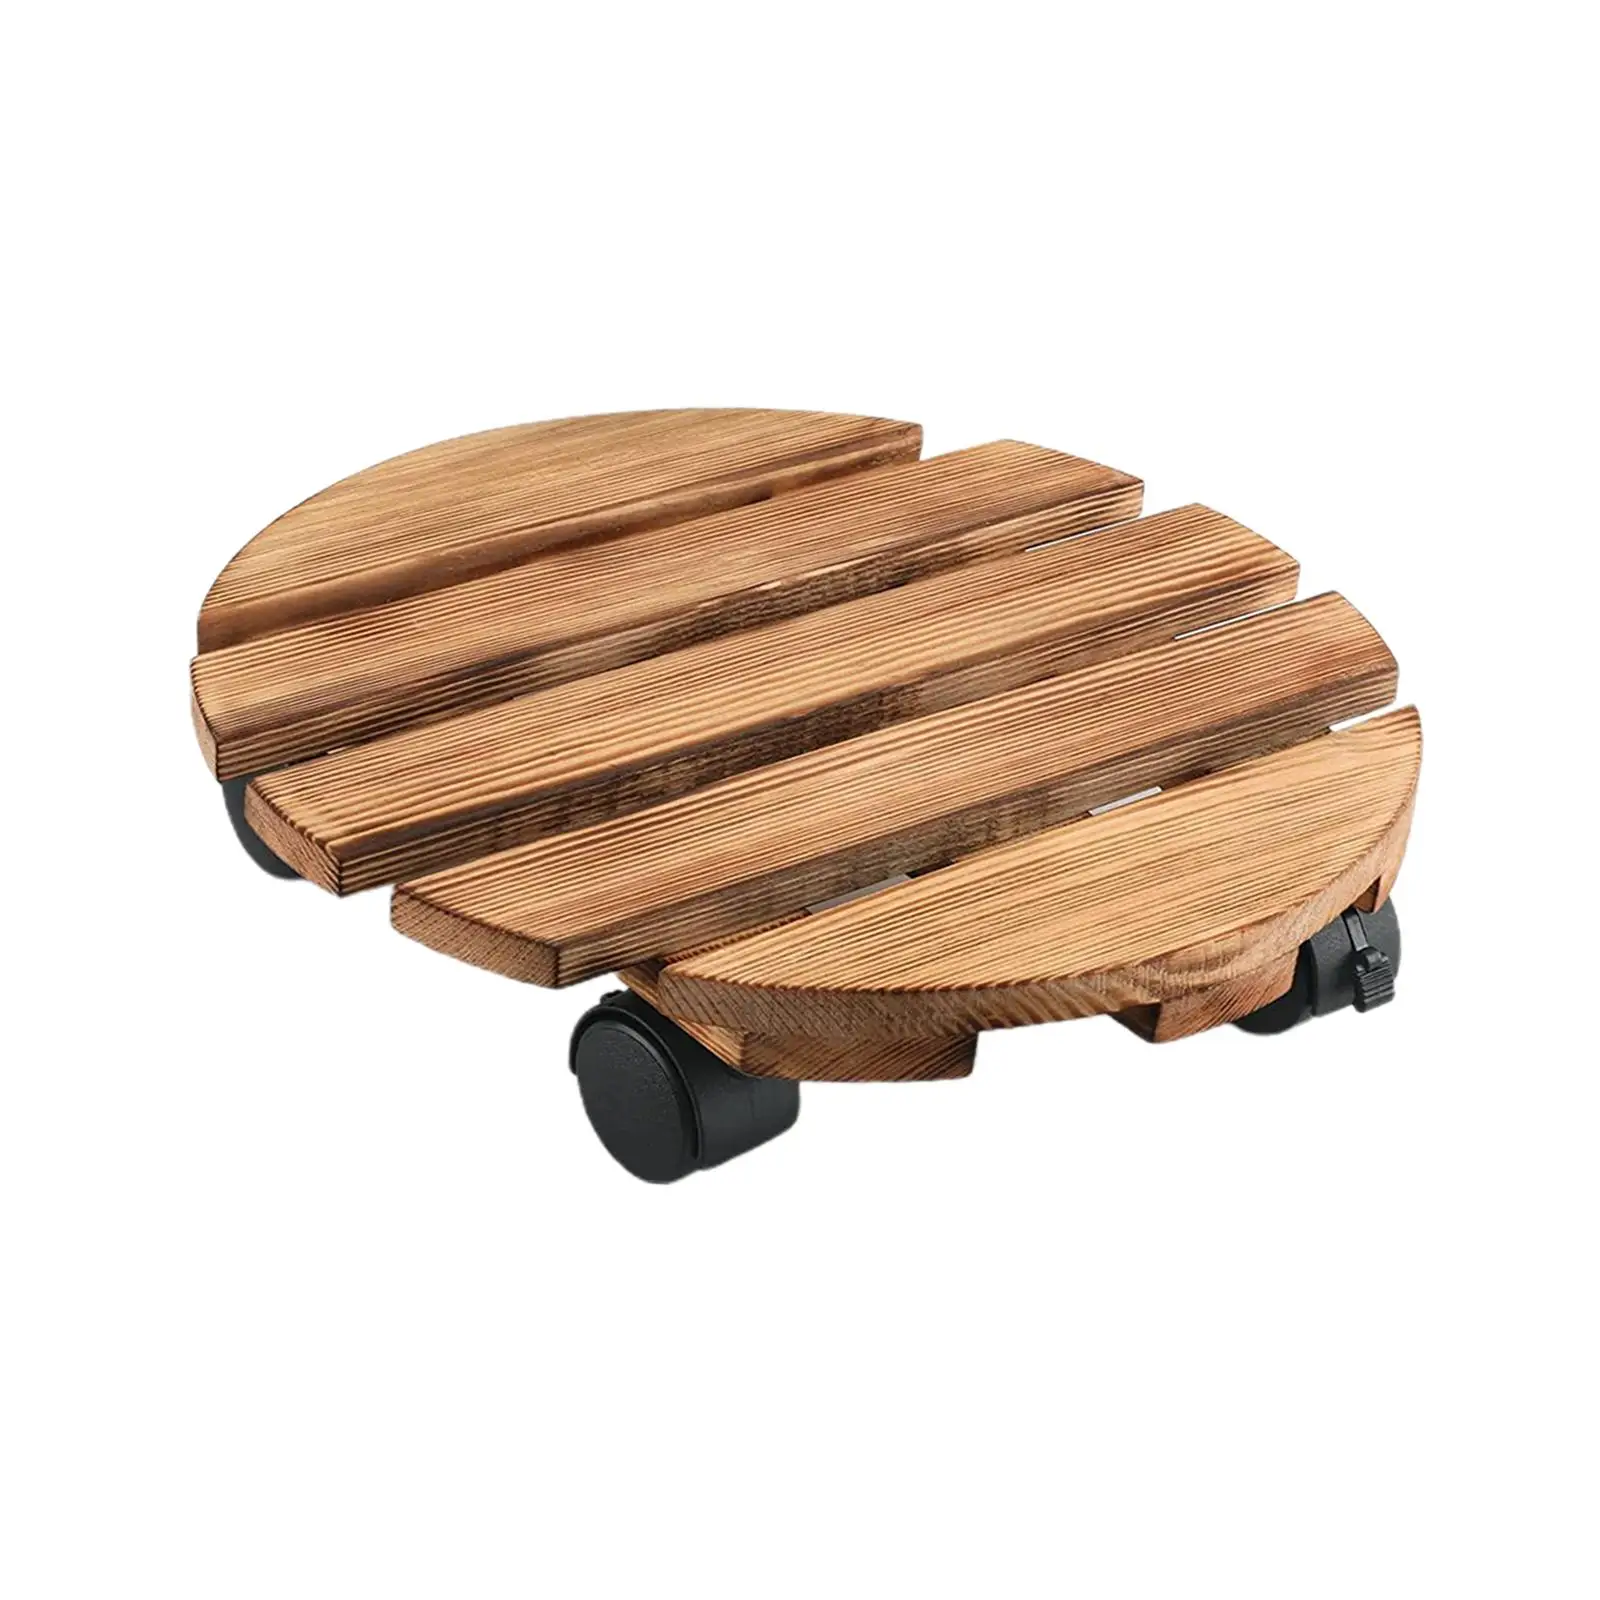 Planter Stand Base Wood 30x30cm Sturdy with Caster Wheels Wear Resistant Plant Stand for Patio Indoor Garden Room Outdoor